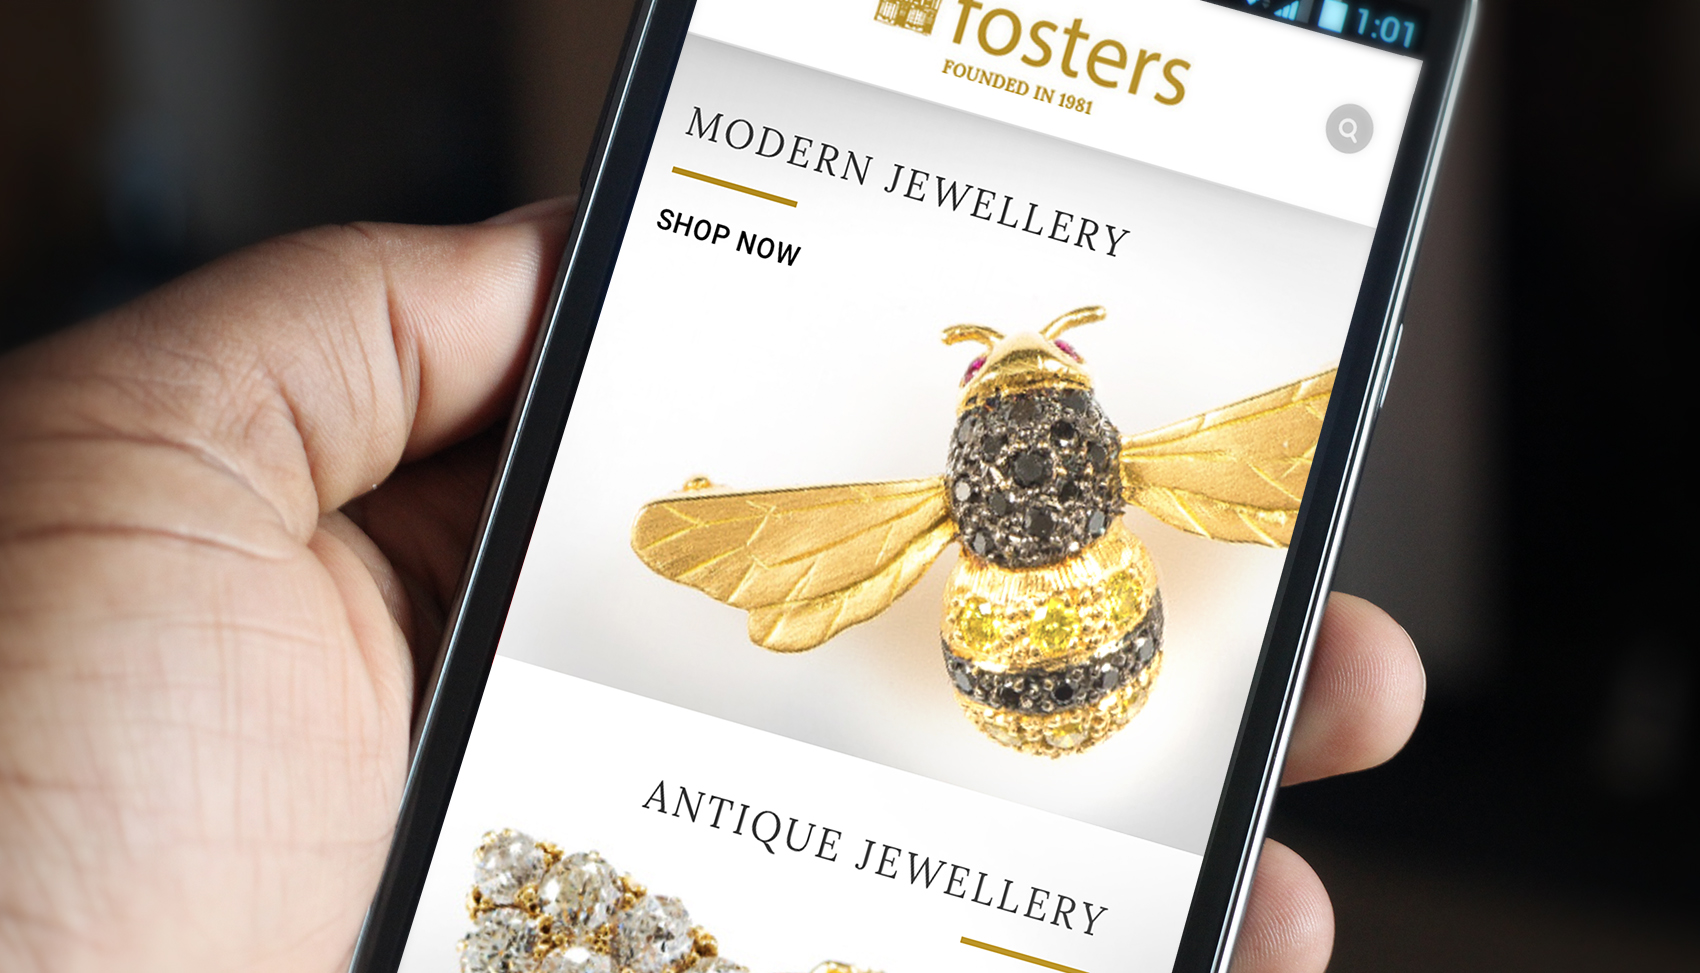 http://Fosters%20Jewellery%20-%20Website%20on%20Mobile